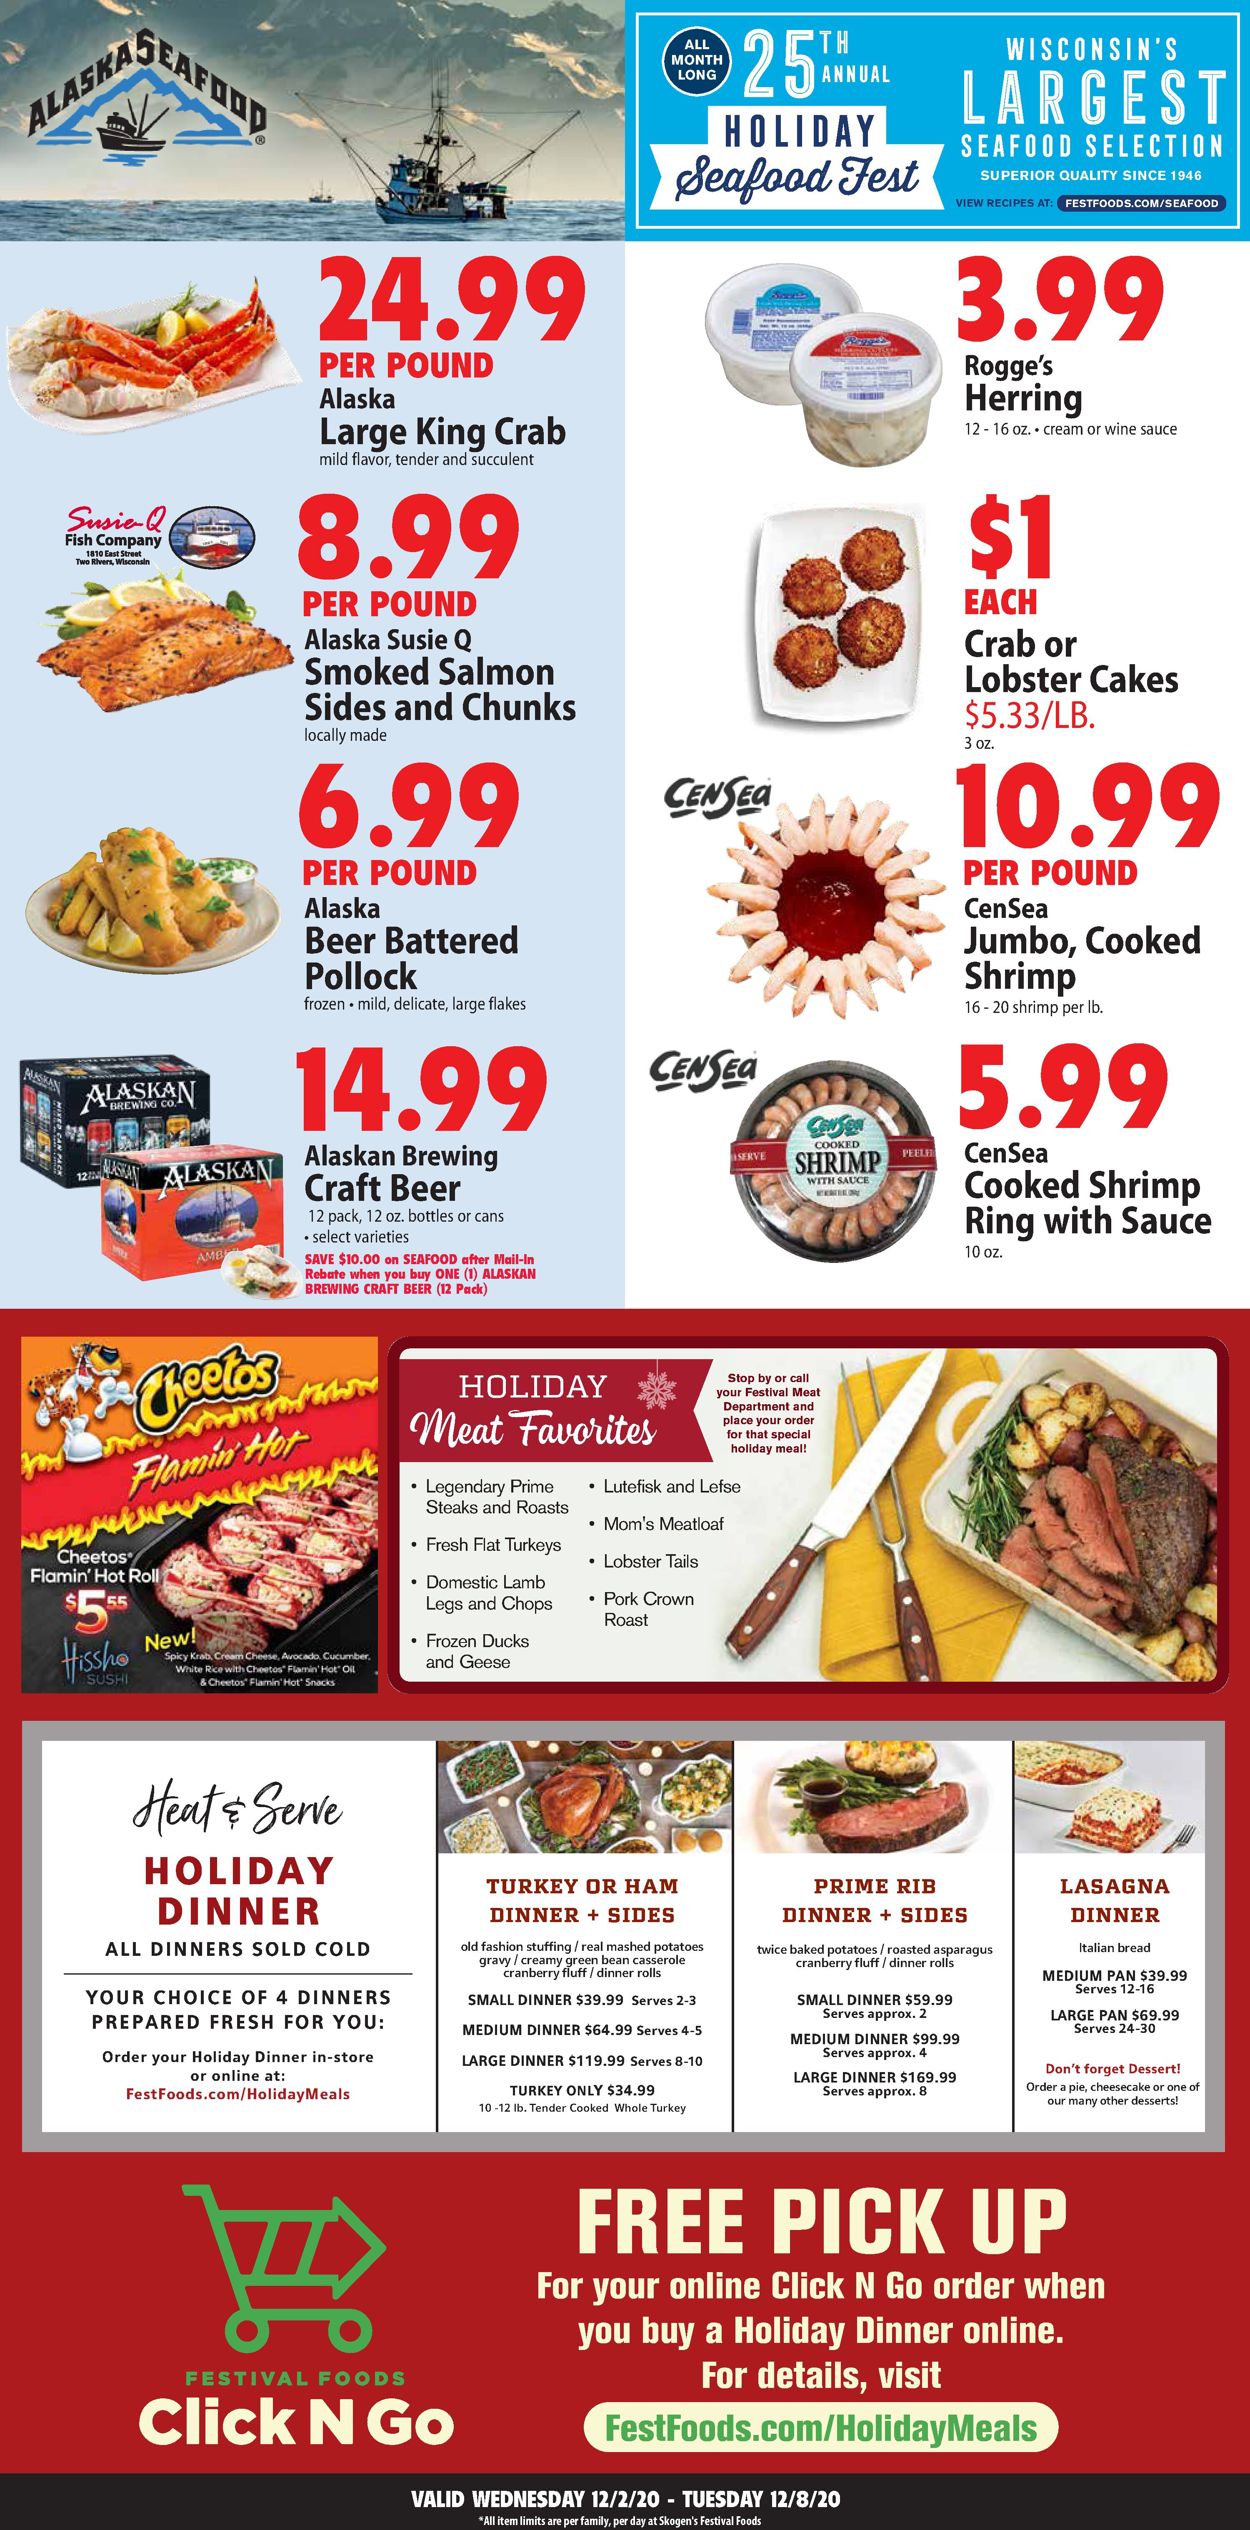 Festival Foods Current weekly ad 12/02 12/08/2020 [3]